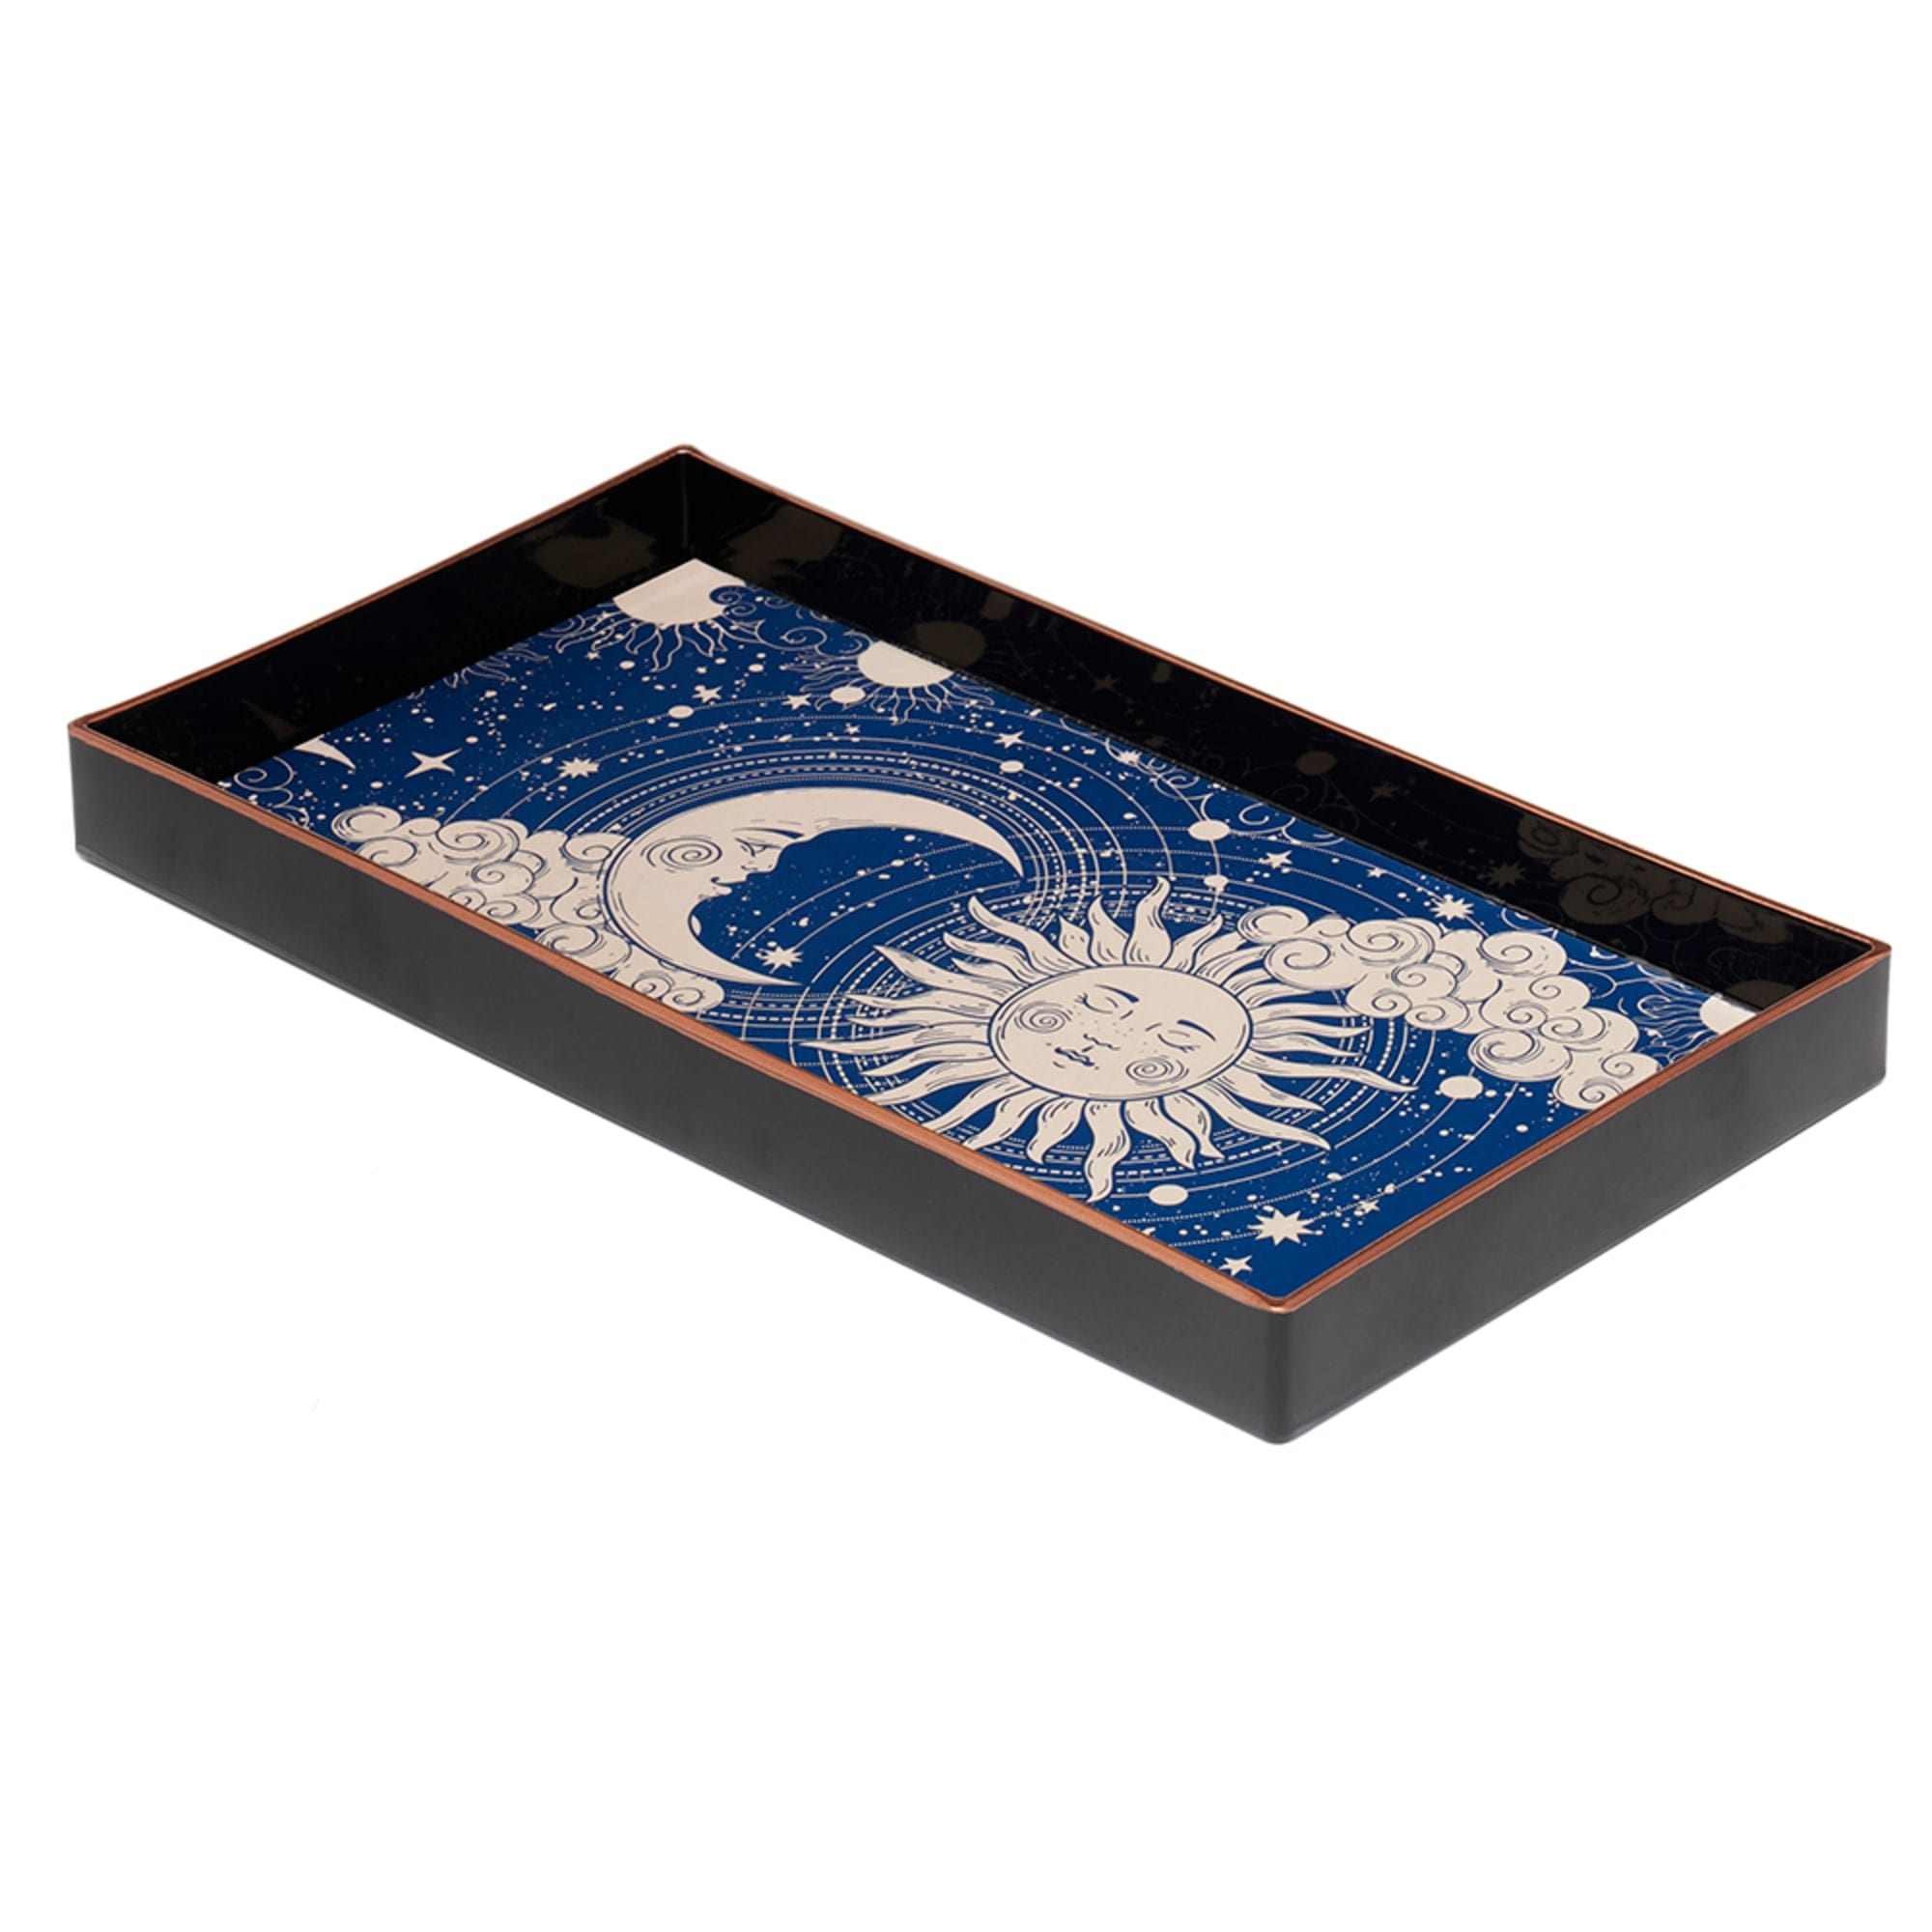 Home Basics 7" x 14" Rectangular Graphic Print Celestial Display Tray, Blue $5.00 EACH, CASE PACK OF 8